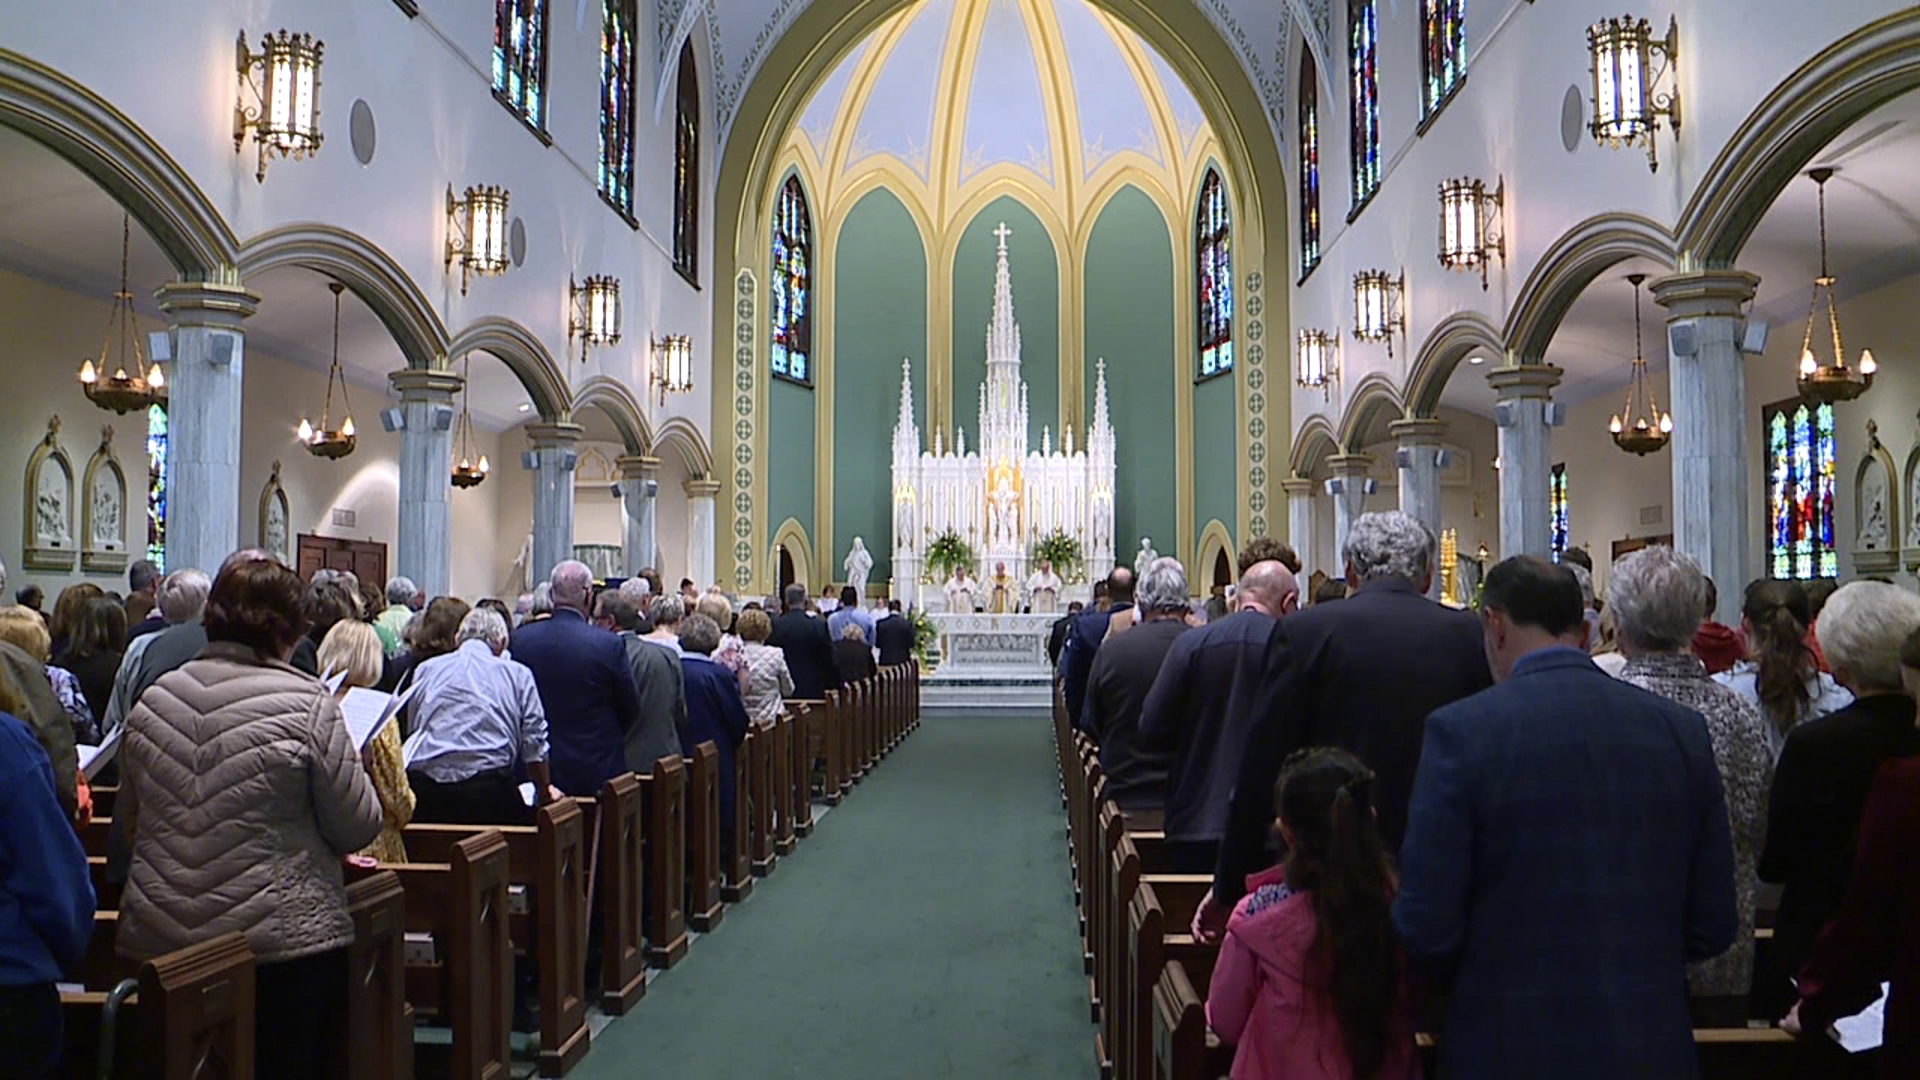 Members of the congregation of Saint Aloysius Church came to service on West Division Street in Wilkes-Barre for a special anniversary mass.